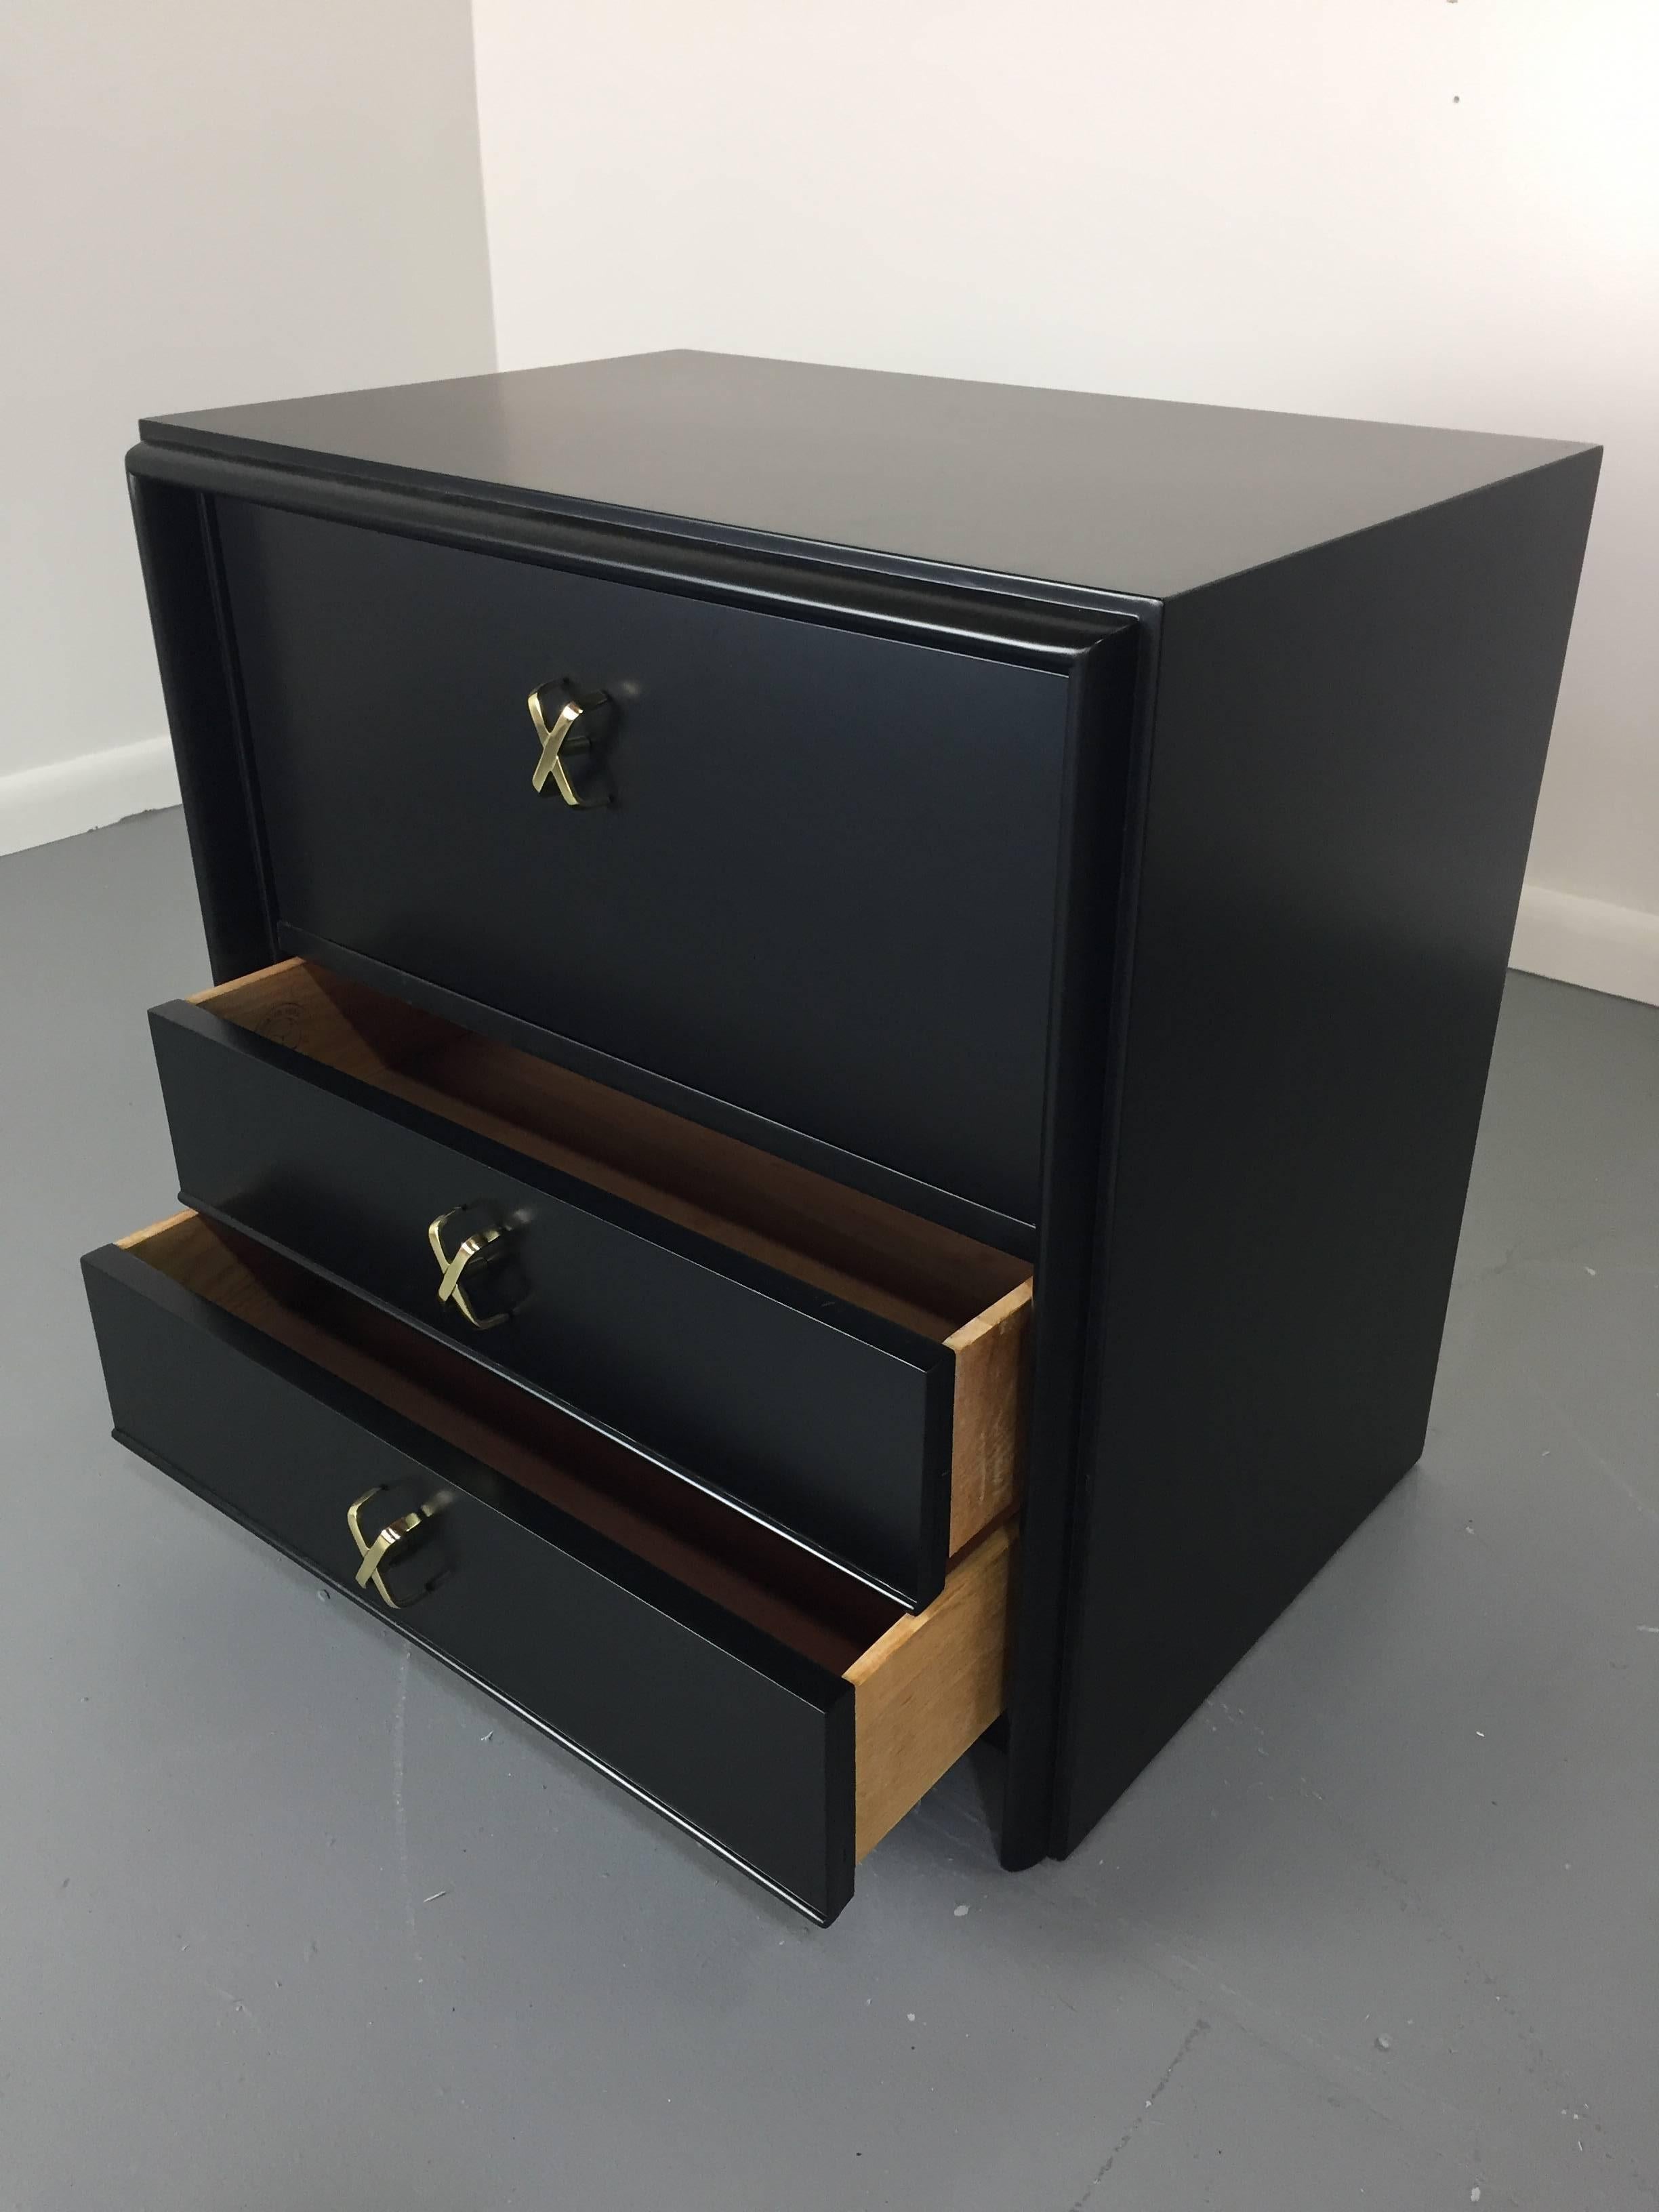 American Paul Frankl for Johnson Furniture Lacquered Nightstands, 1950s, Pair Mid Century